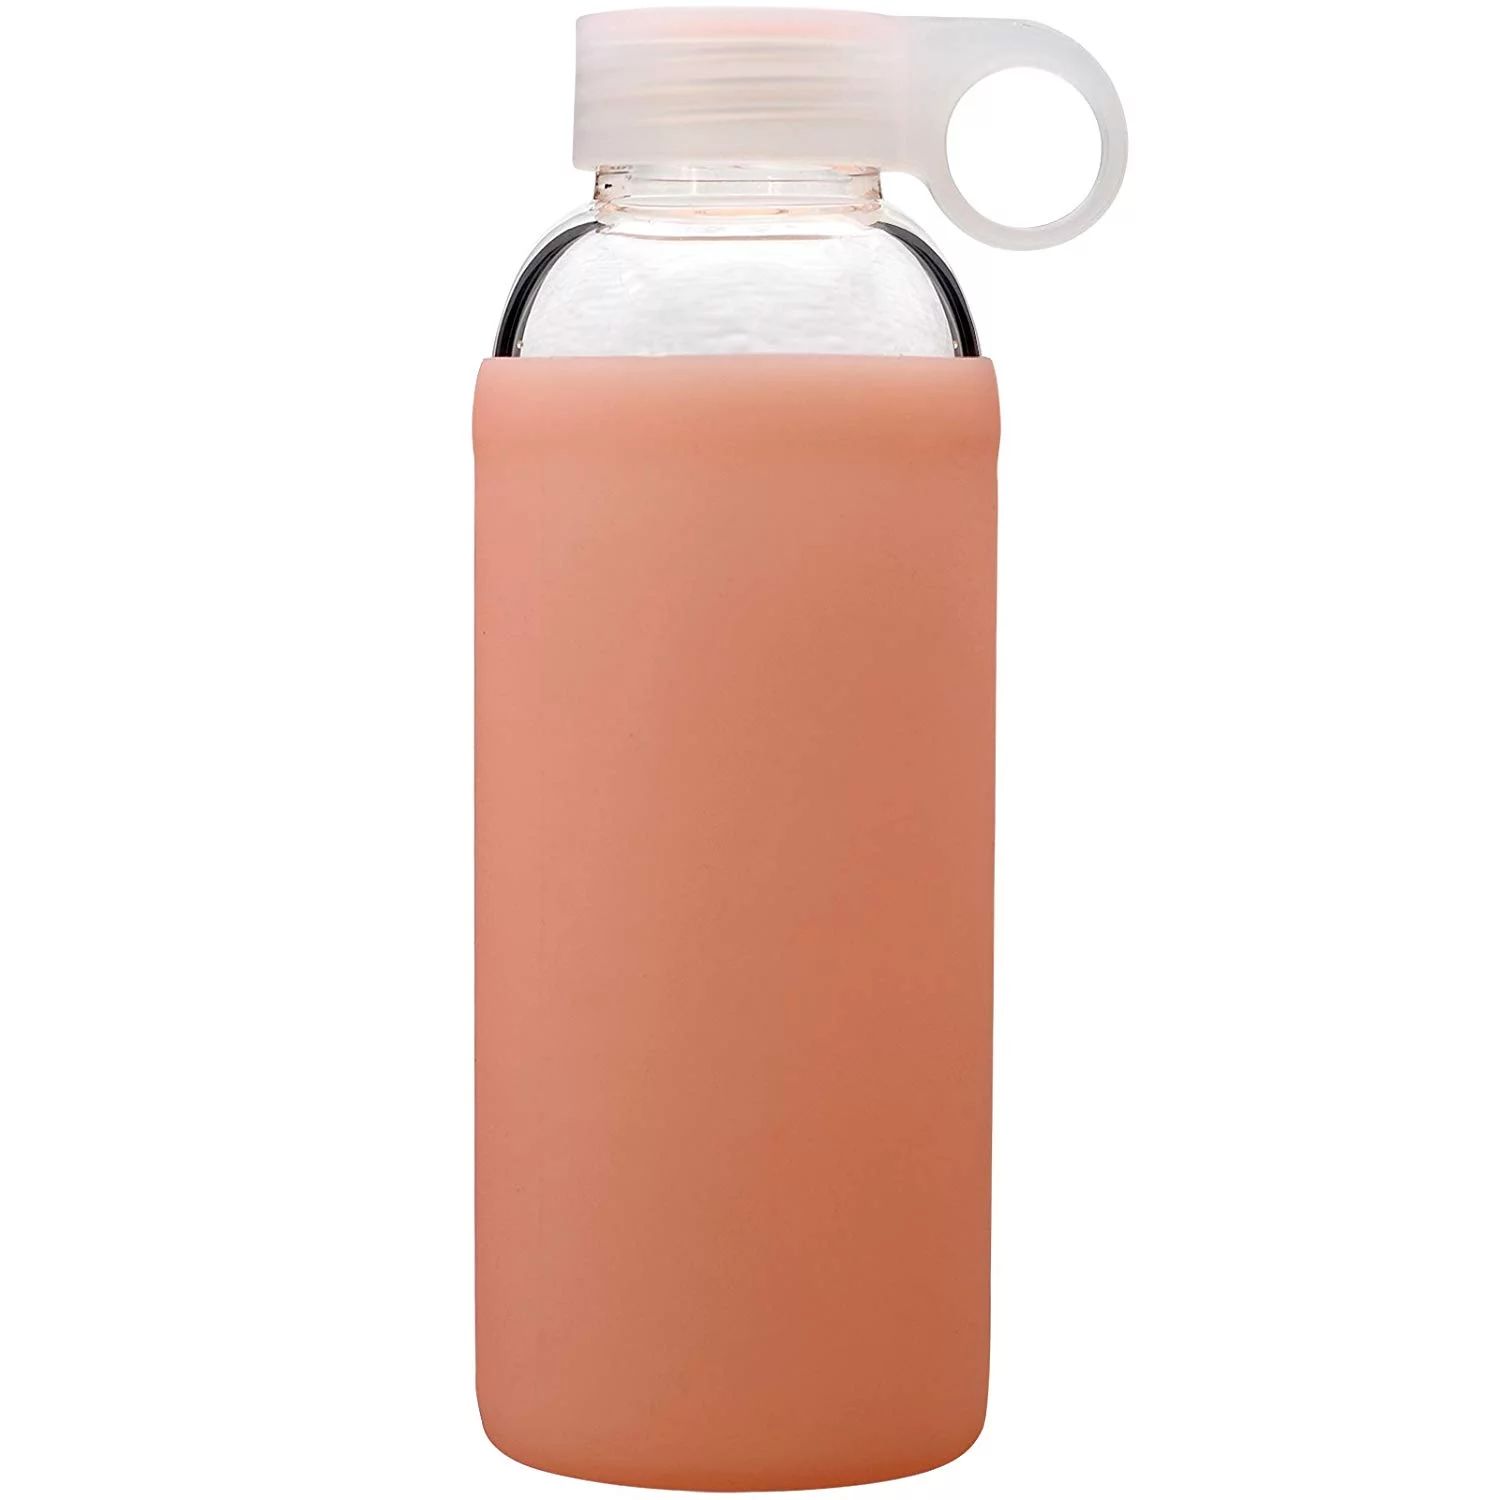 Bonison Jelly Glass Bottle, Borosilicate Glass Bottle with Peach Silicone Protective Sleeve, Perf... | Walmart (US)